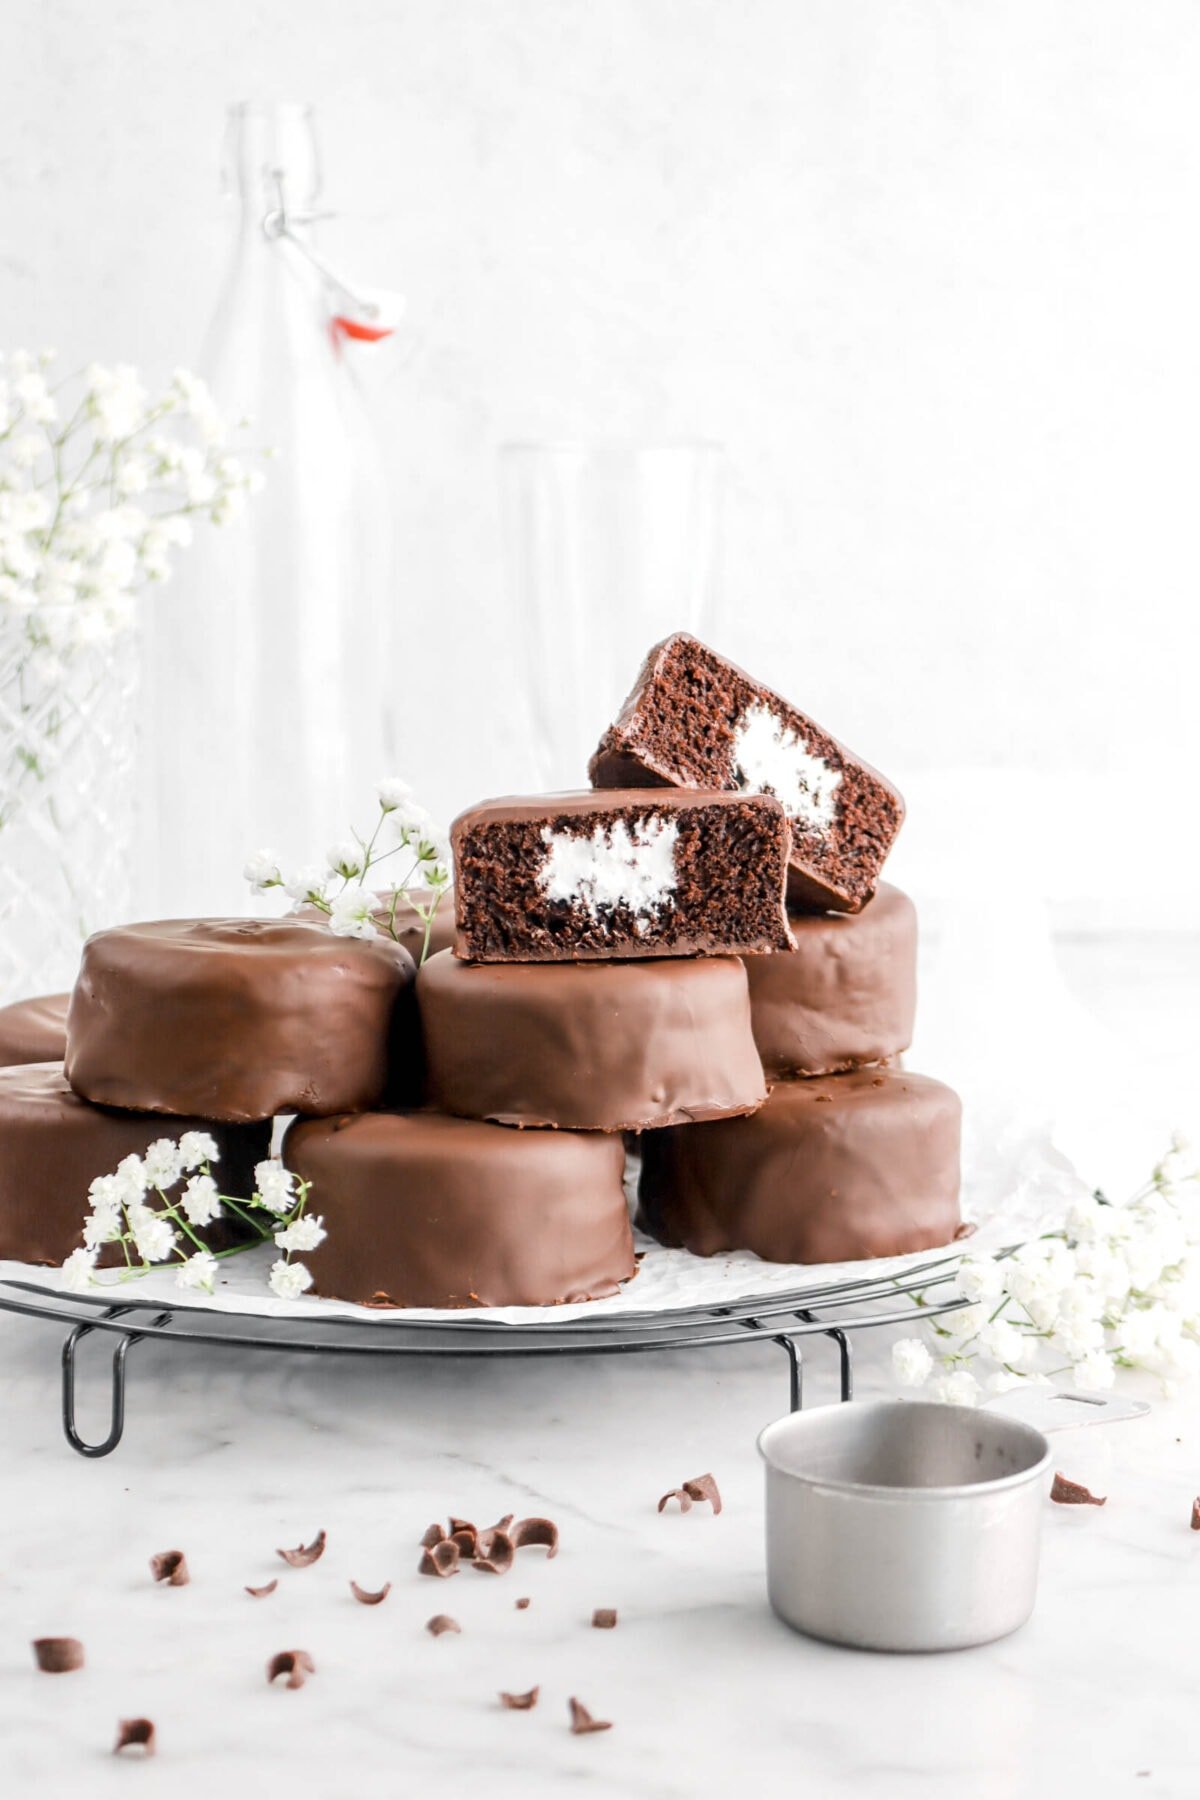 stacked mini chocolate coated chocolate cakes with one sliced in half, leaning against itself, with flowers around